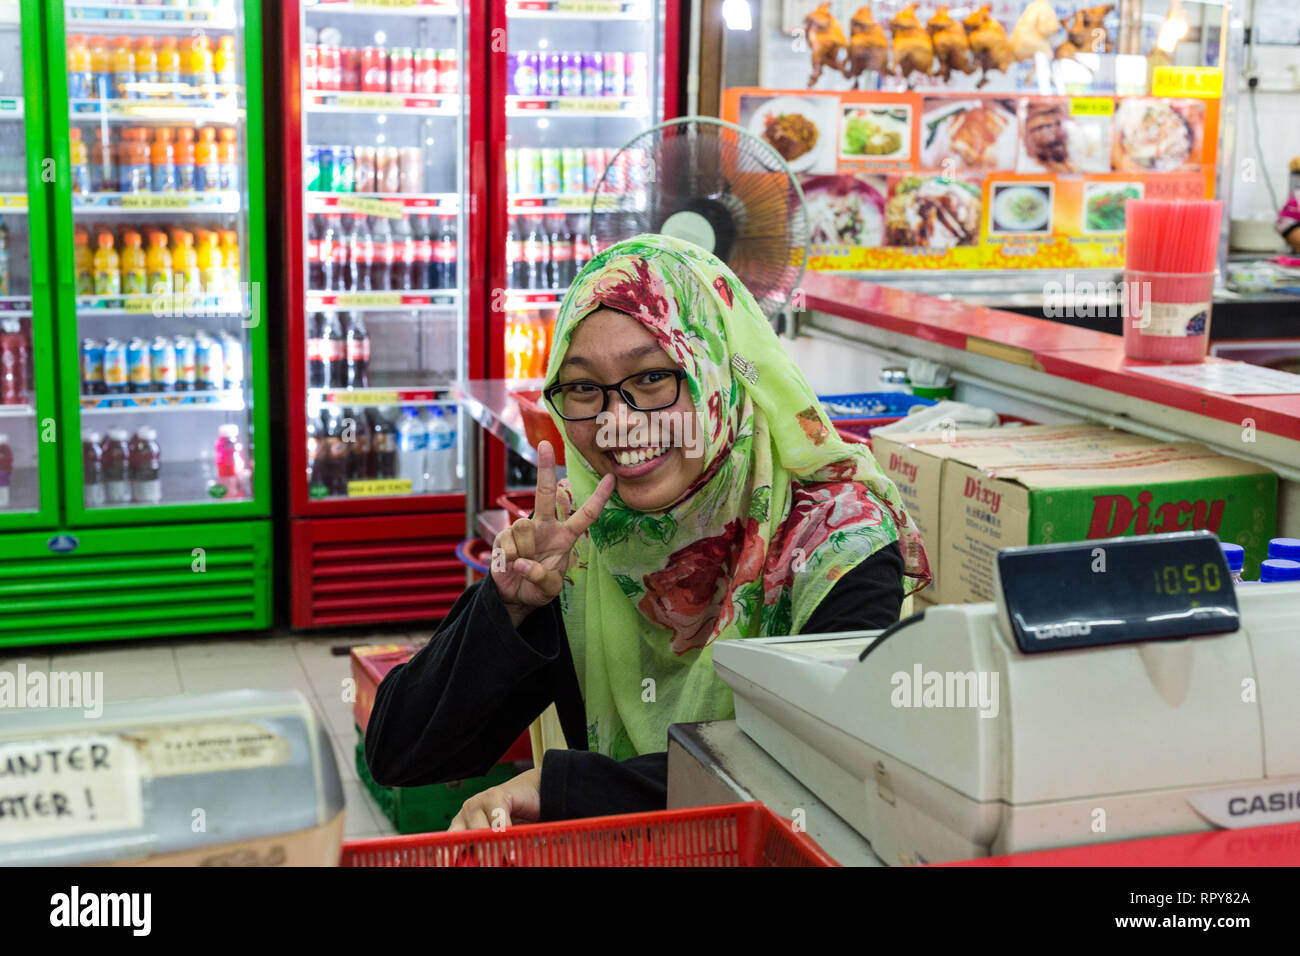 Malaysia, Roadside Rest Stop Refreshment Stand Cashier, Highway AH2. Stock Photo